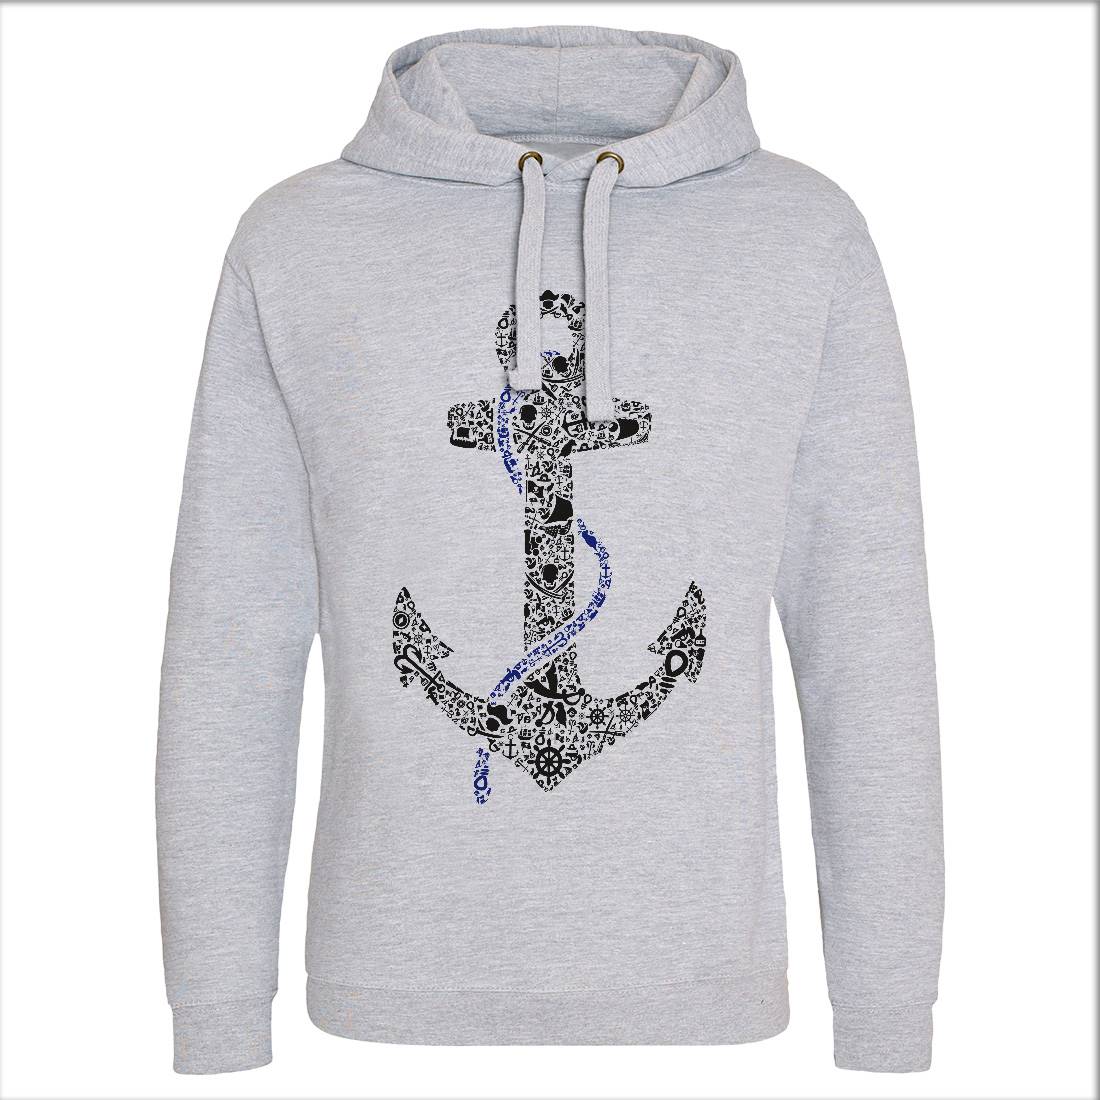 Anchor Mens Hoodie Without Pocket Navy B001